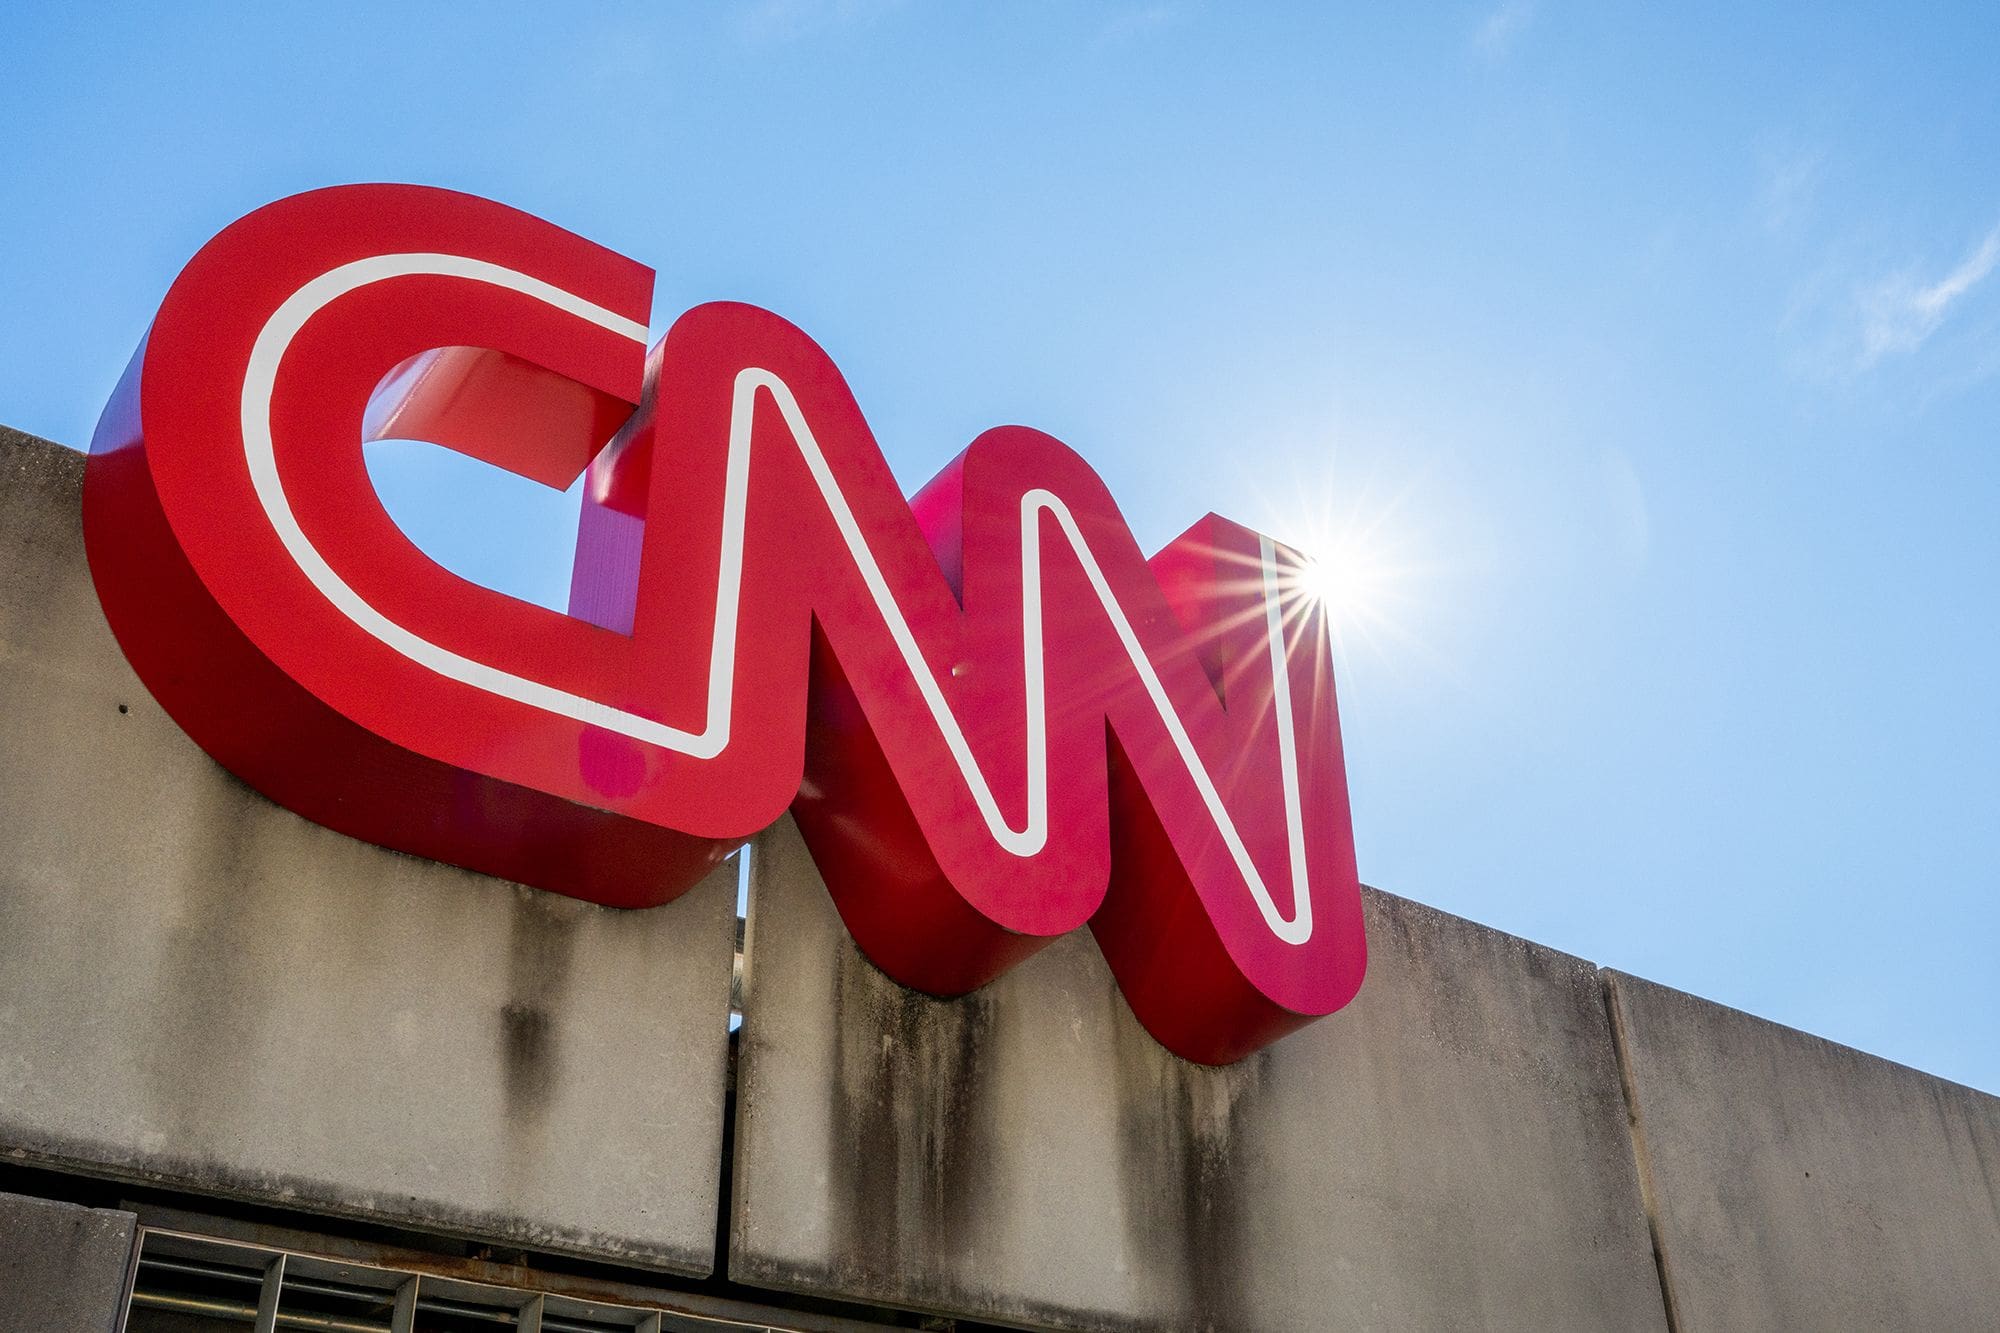 Say What Now? CNN Primetime Ratings Reach 33-Year Low as Insiders Reportedly Brace for ‘Bloodbath’ of Staff Cuts